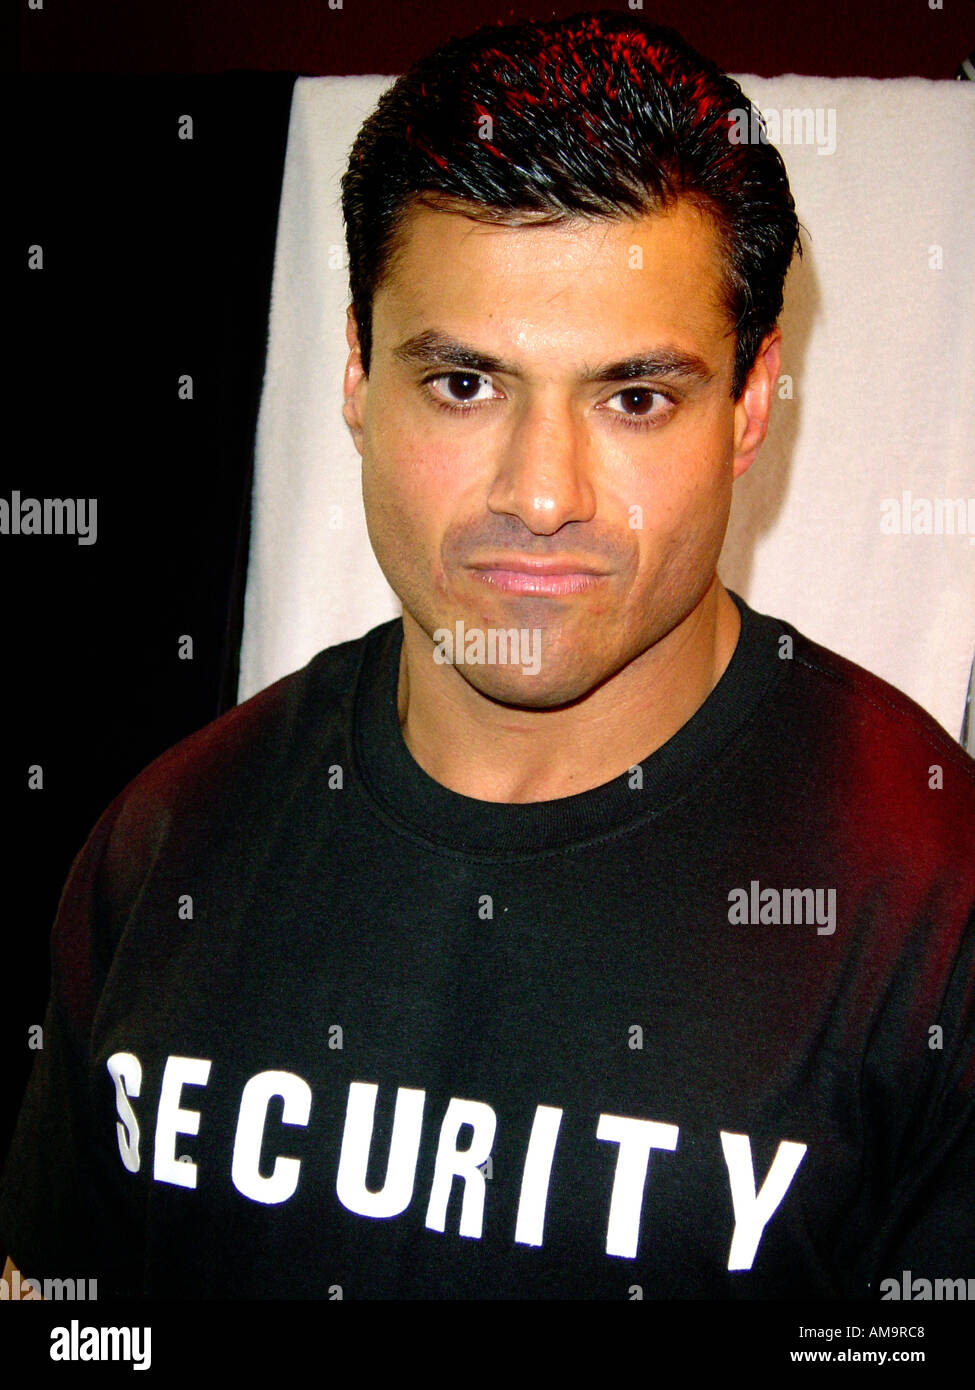 Portrait of a Male Security Guard or Bouncer of Hispanic Ethnicity Wearing a Black Tee Shirt Stock Photo